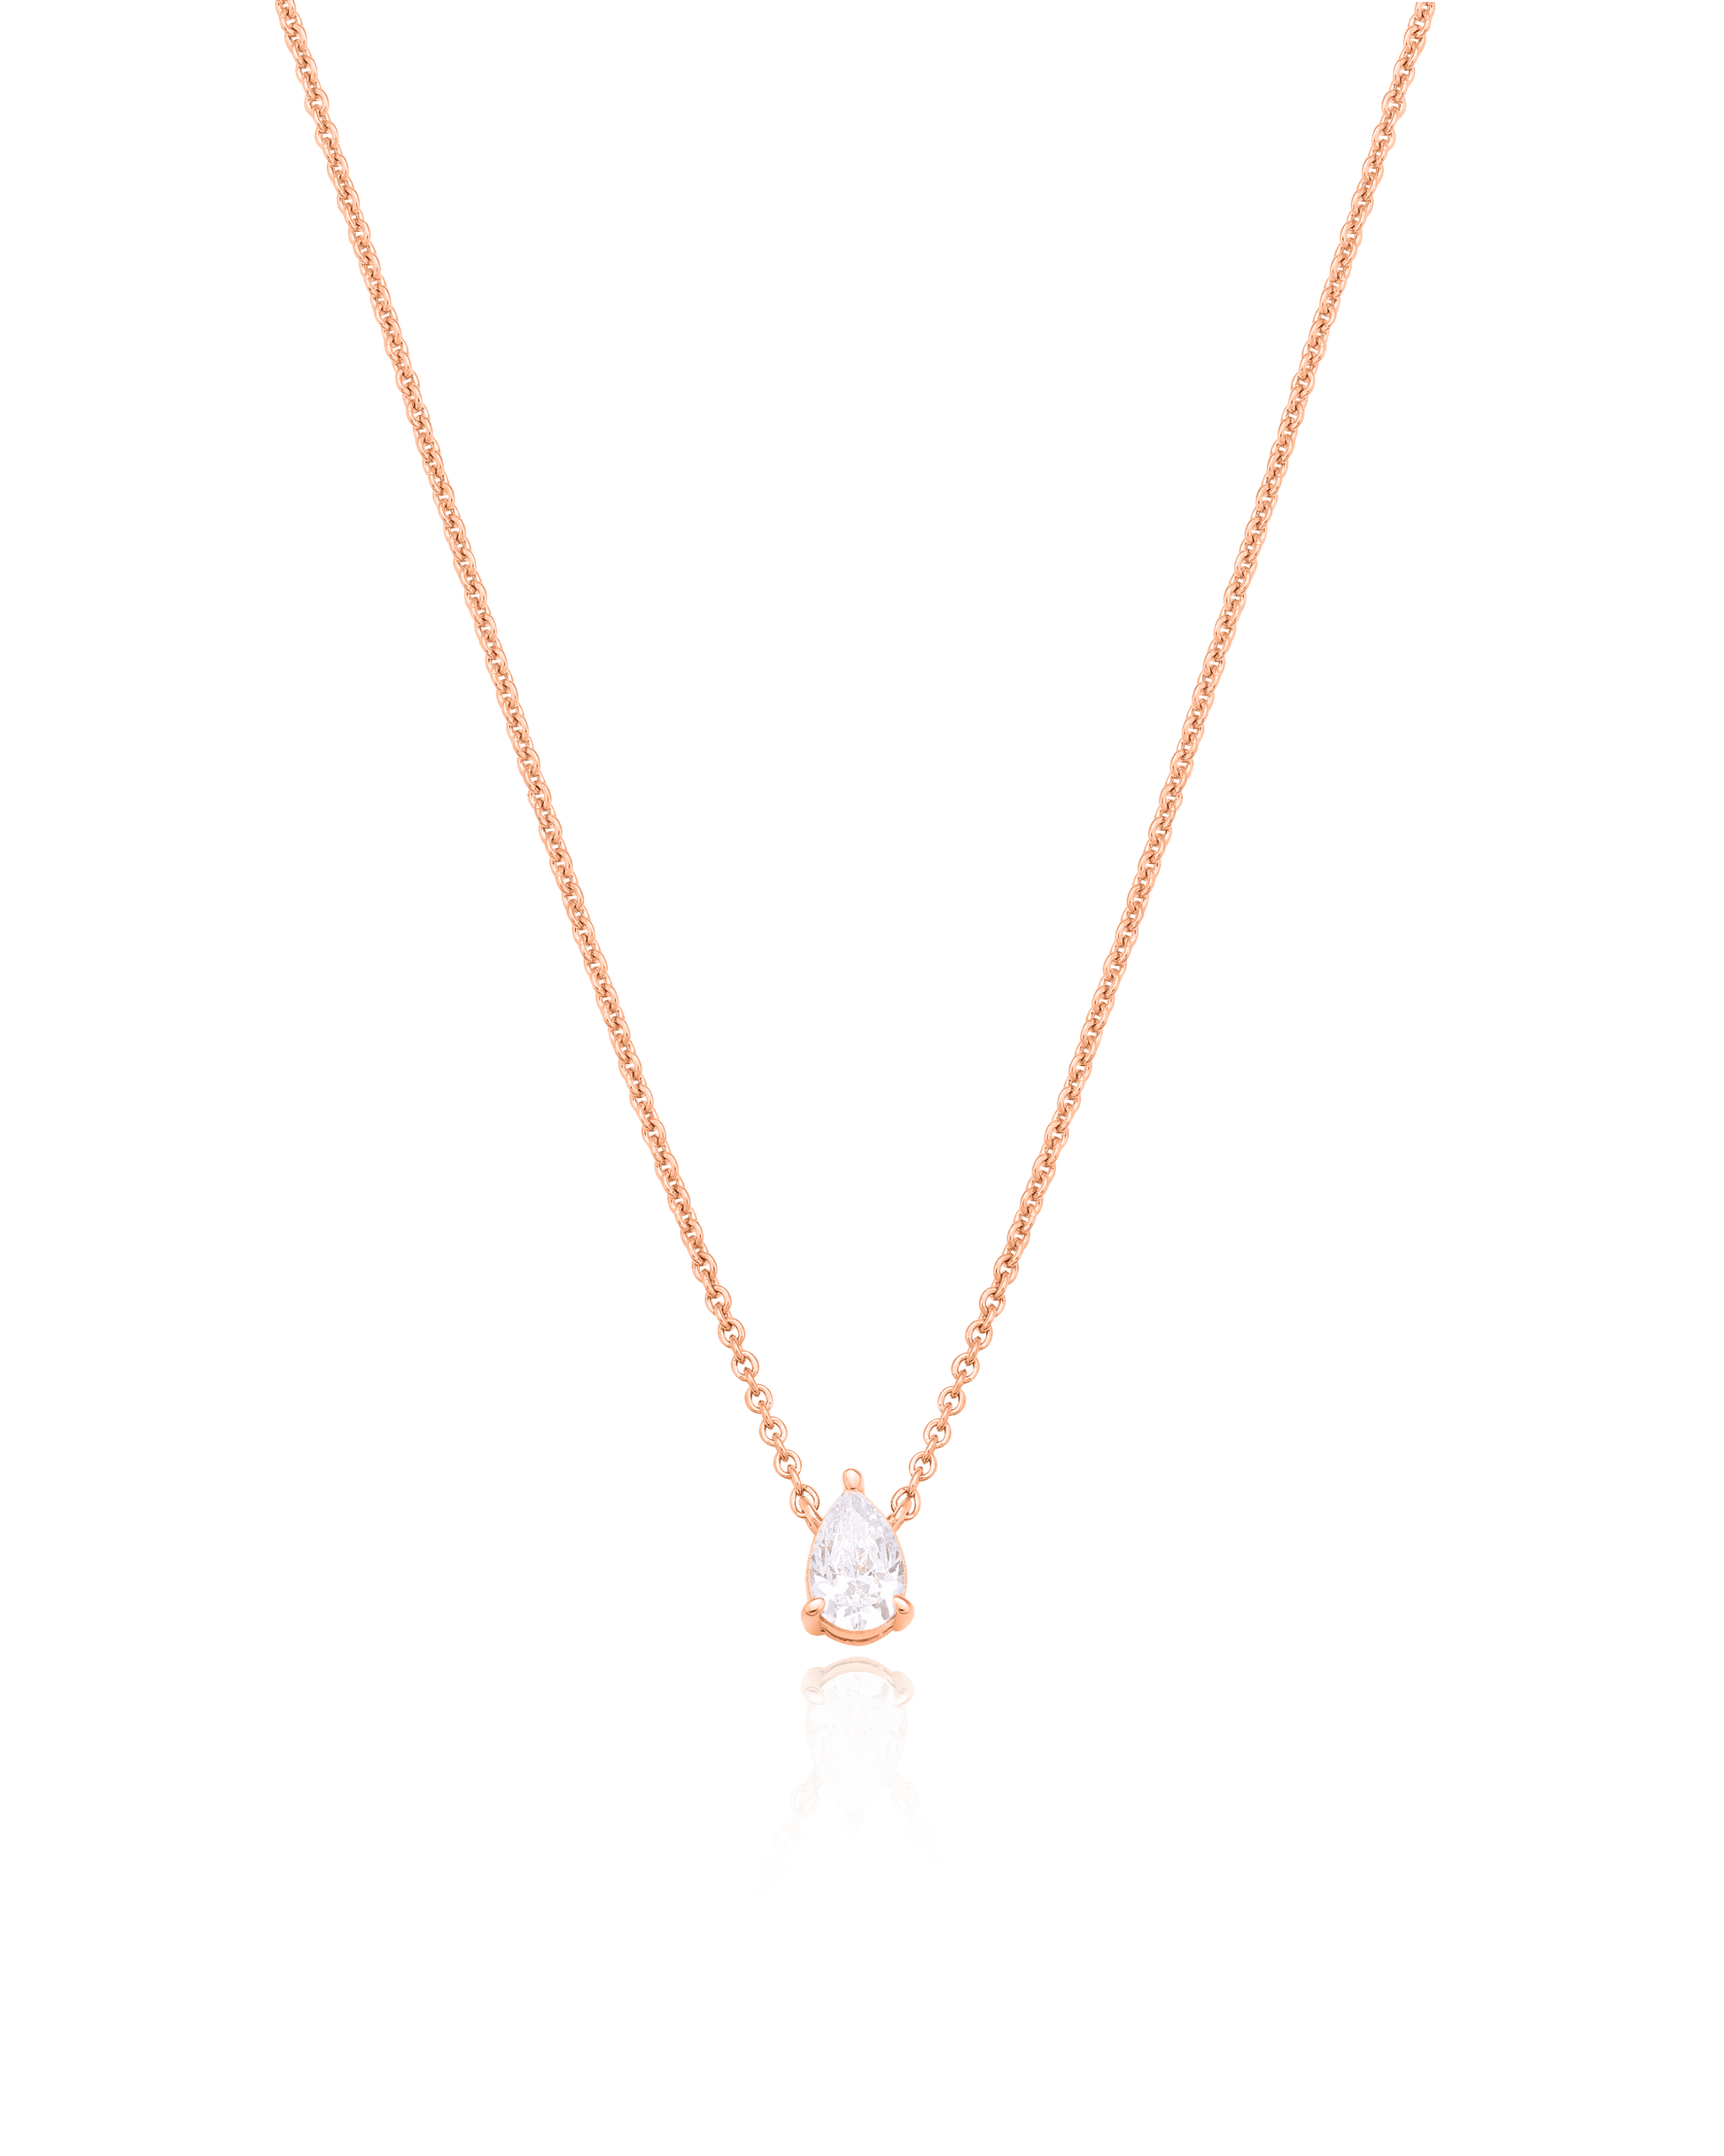 Pear Solitaire Diamond Necklace - 14K Rose Gold Necklaces magal-dev 0.10 CT 16” 